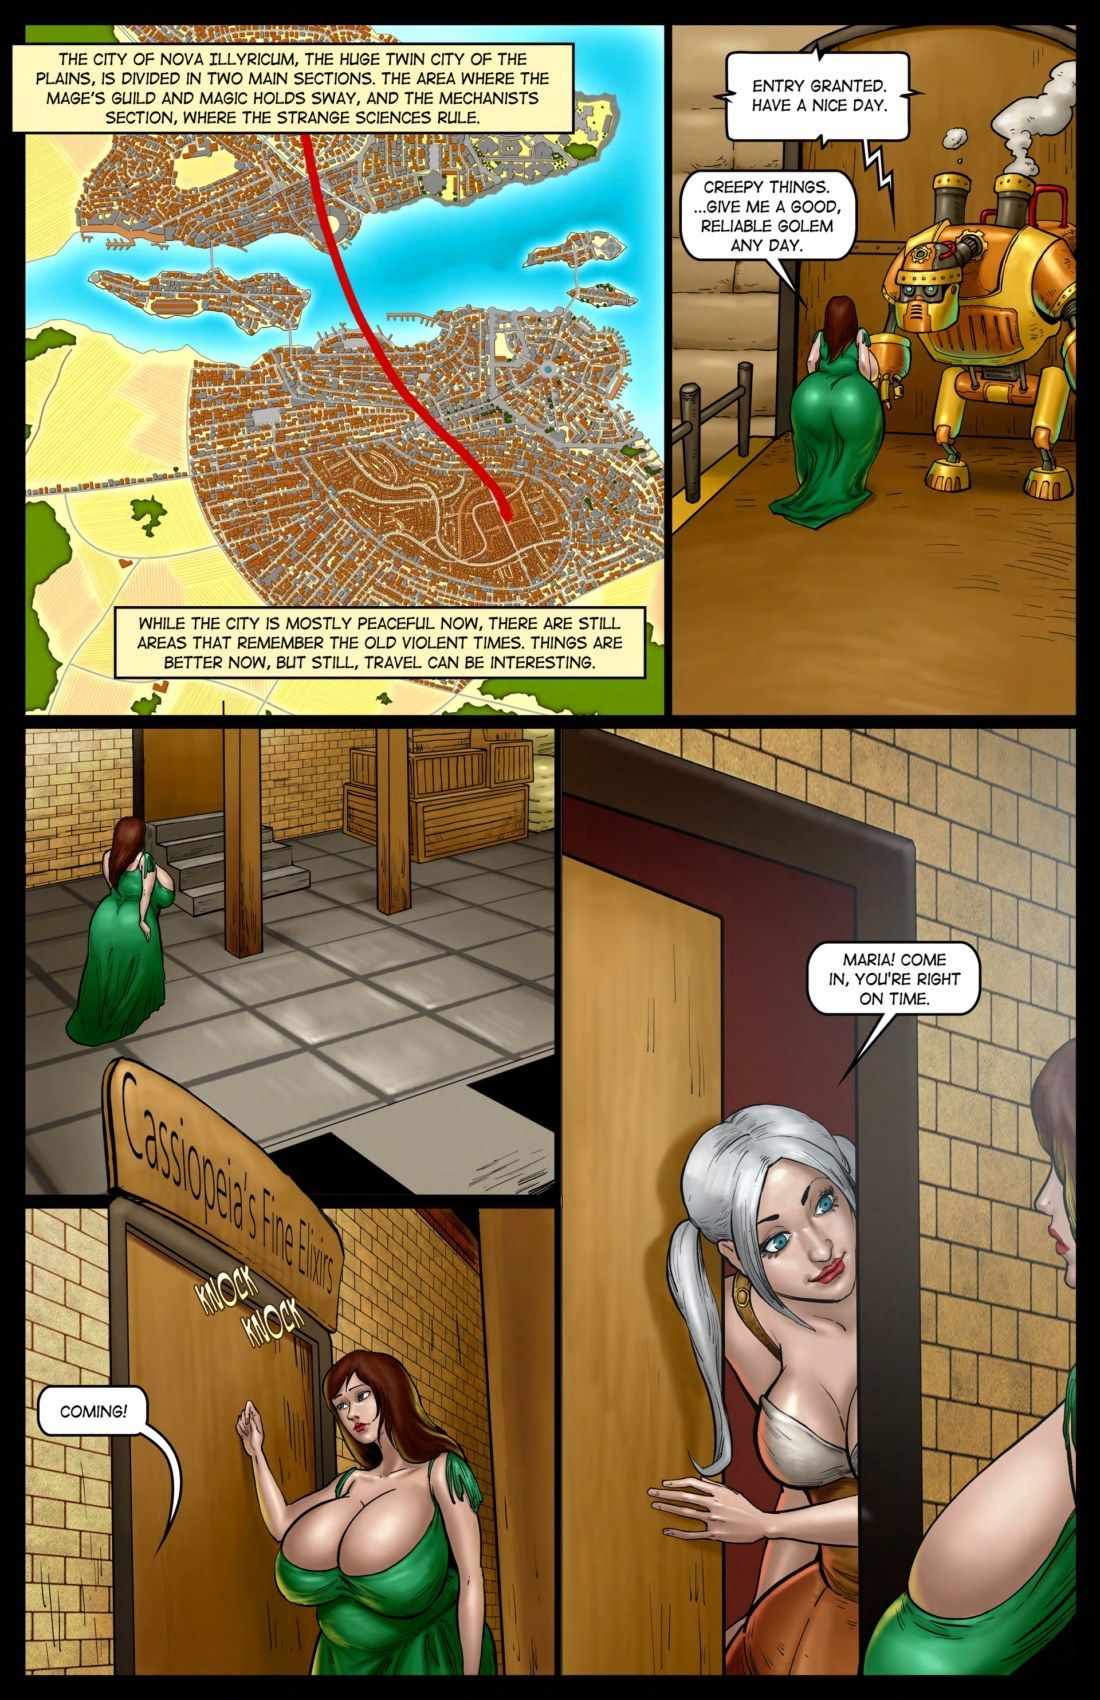 Nova Illyricum 2 Mad Science and Magic (ExpansionFan) page 4